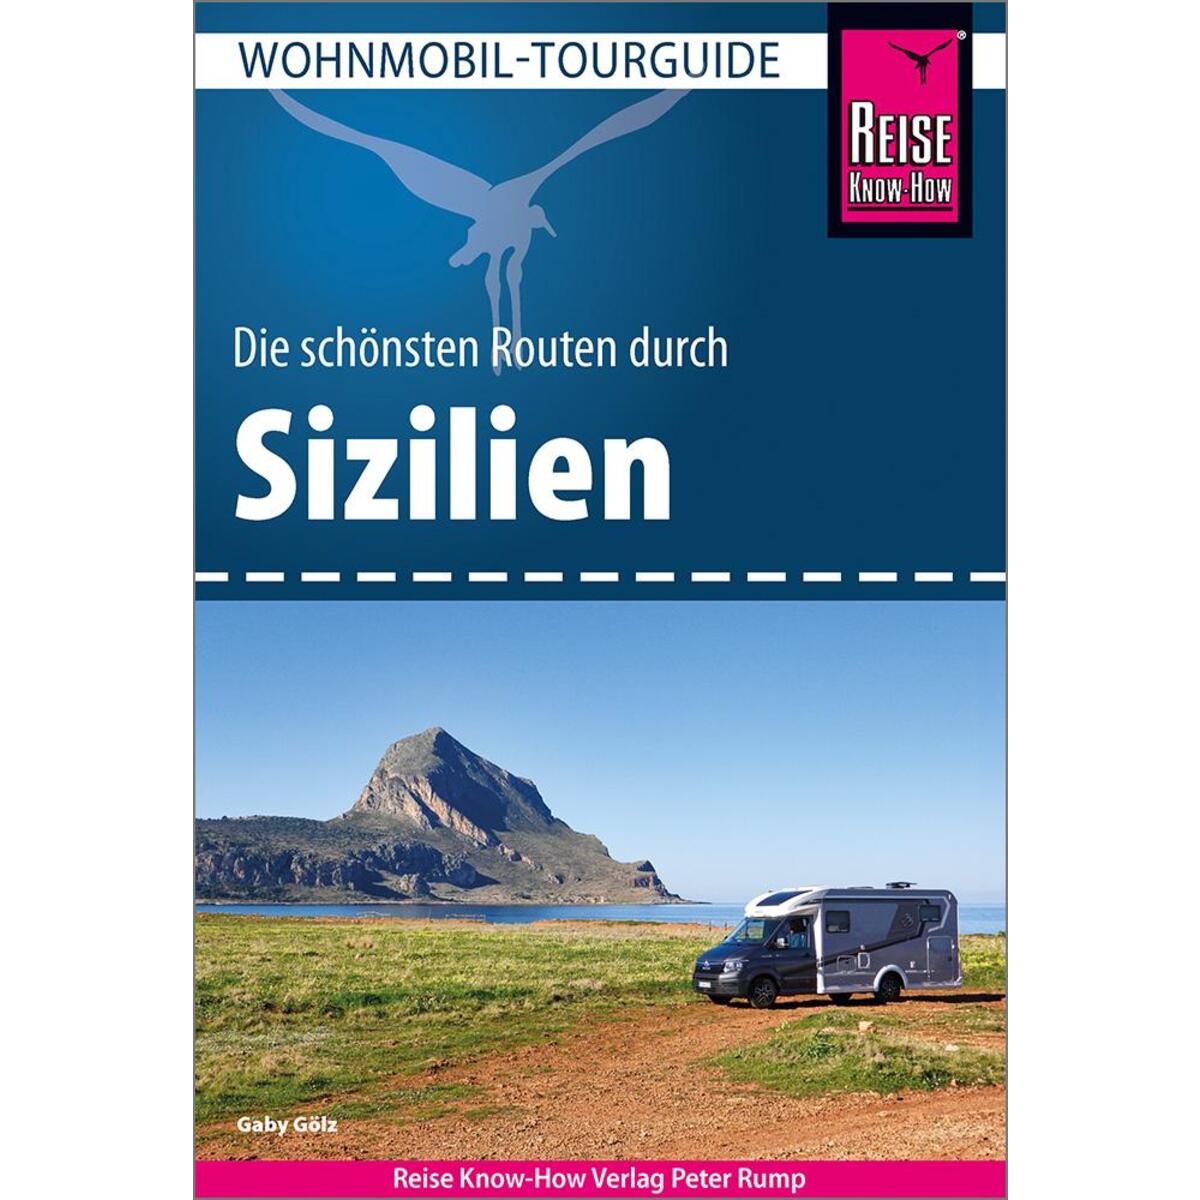 Reise Know-How Wohnmobil-Tourguide Sizilien von Reise Know-How Rump GmbH